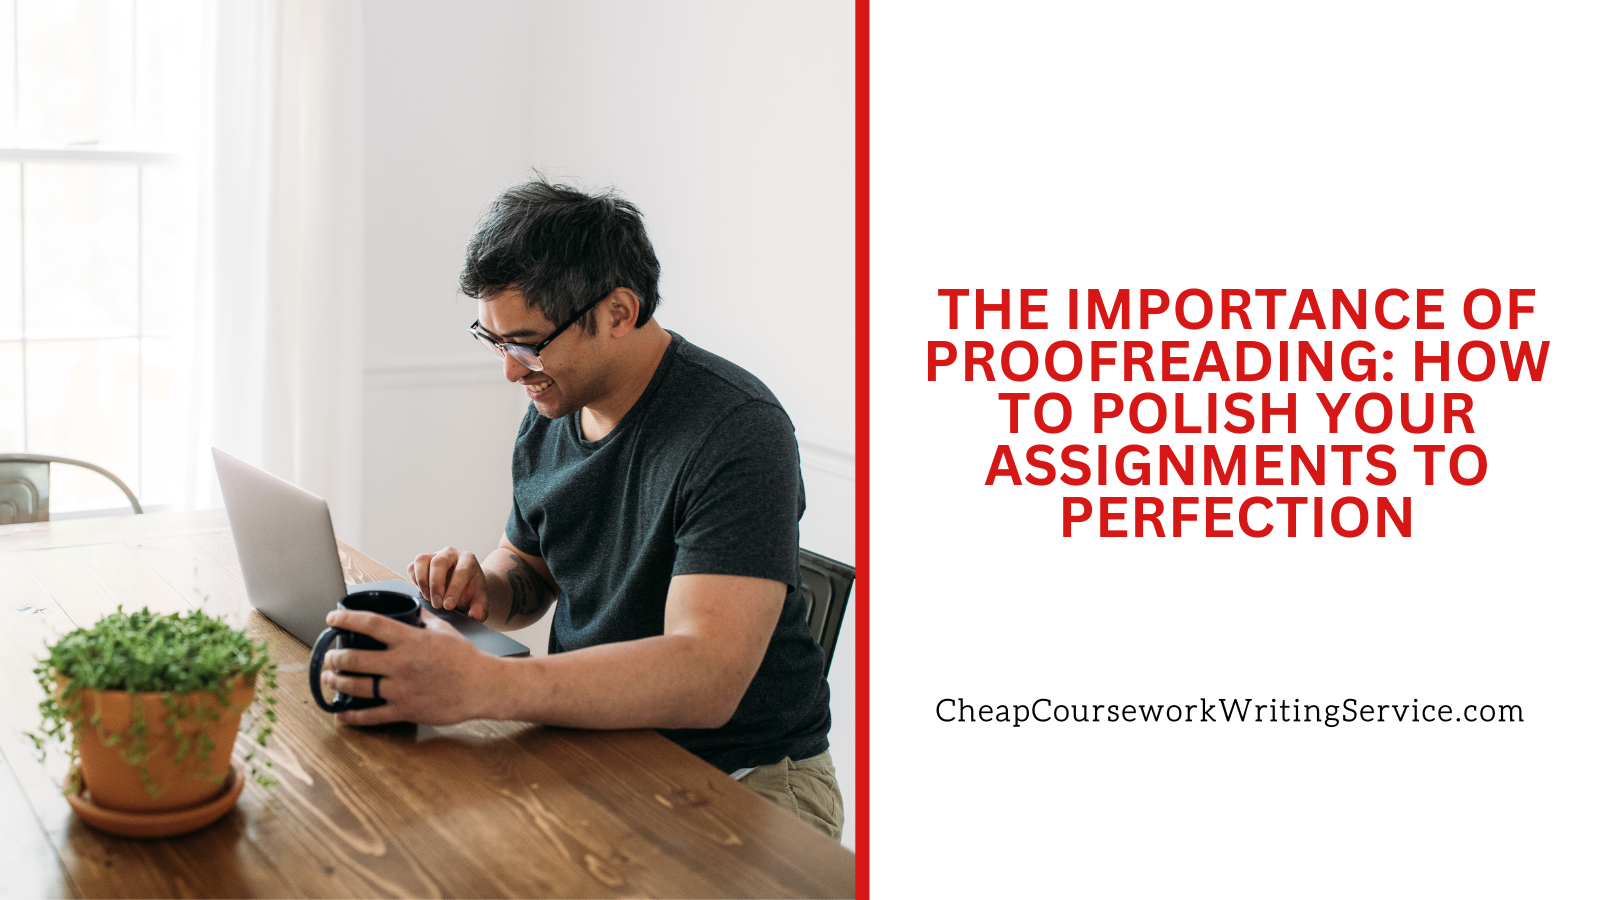 The Importance of Proofreading: How to Polish Your Assignments to Perfection